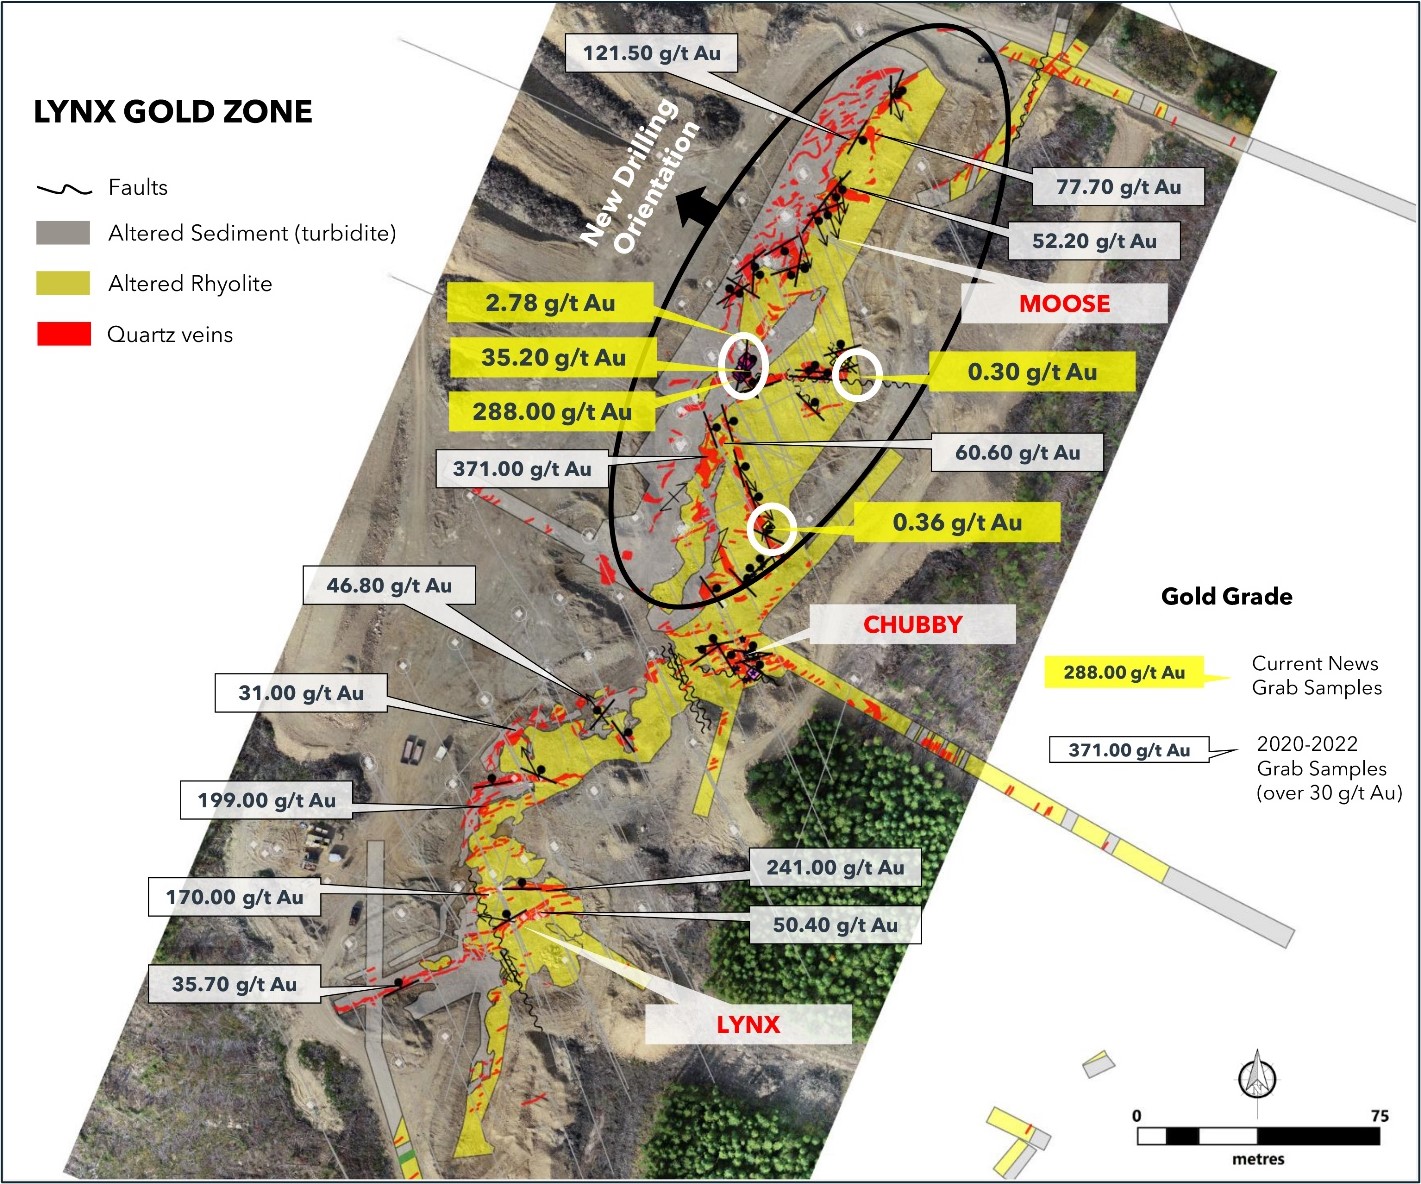 Surface mapping of the Lynx Gold Zone